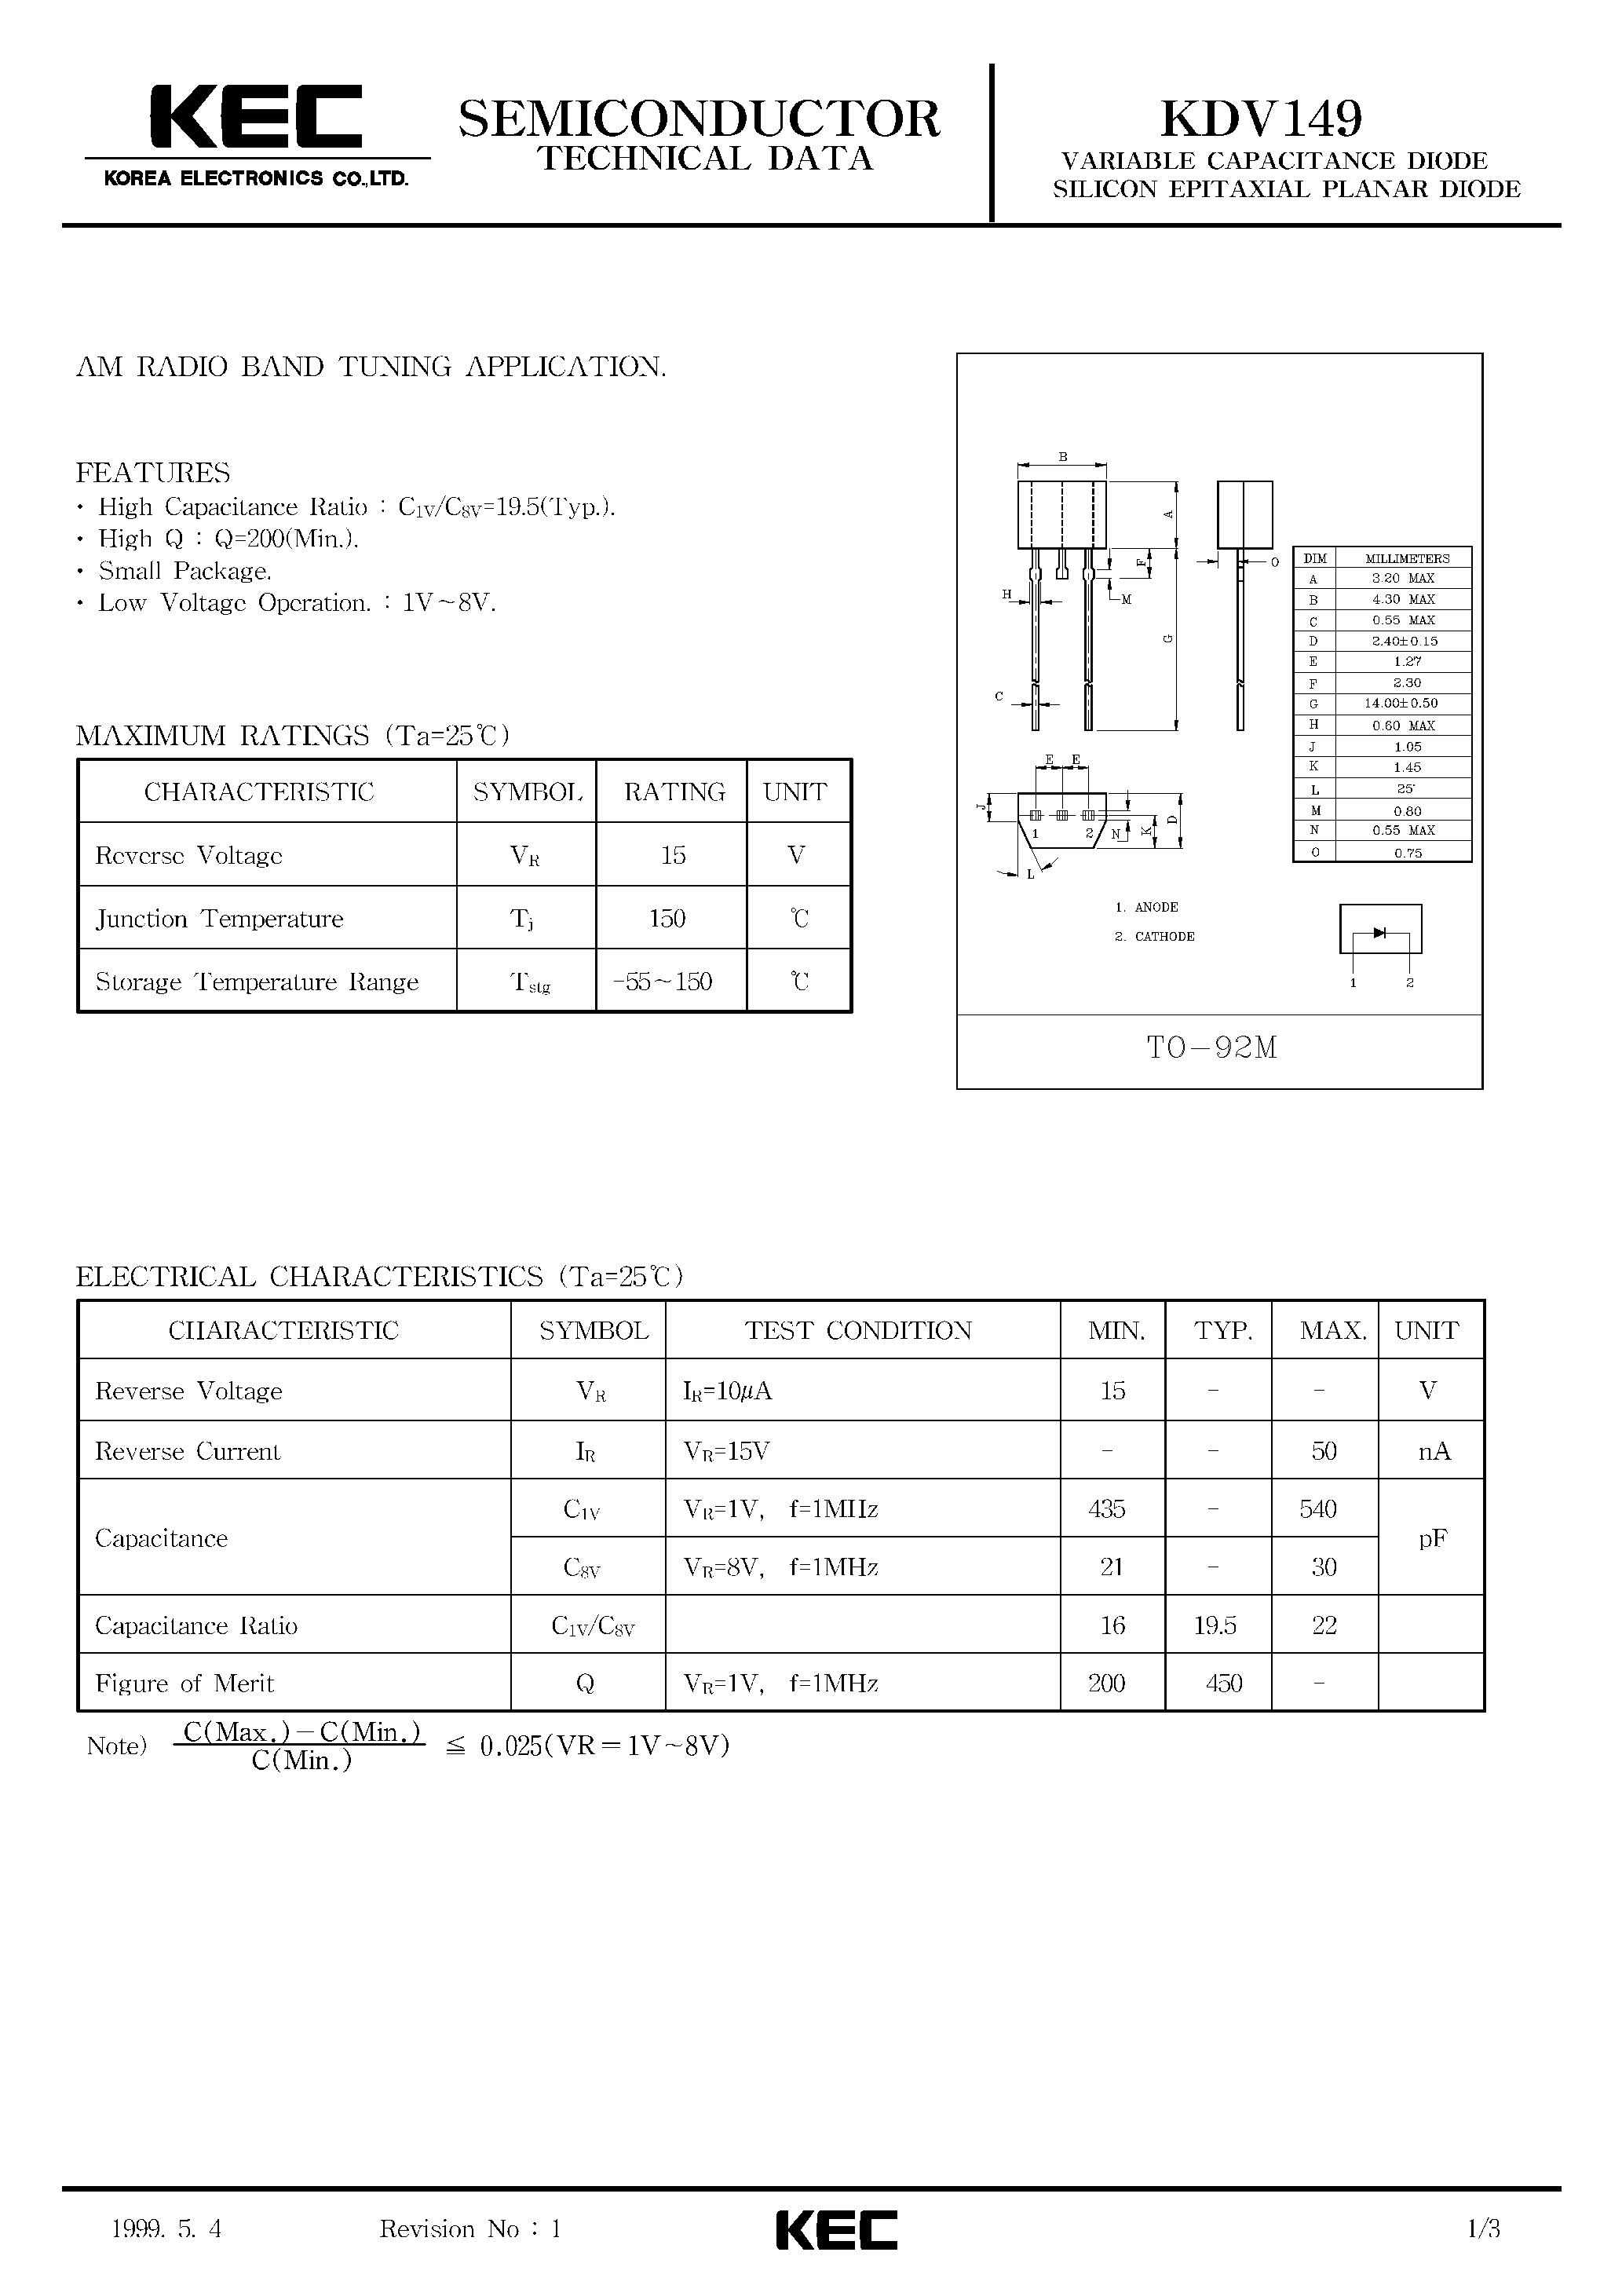 Даташит KDV149 - VARIABLE CAPACITANCE DIODE SILICON EPITAXIAL PLANAR DIODE(AM RADIO BAND TUNING) страница 1